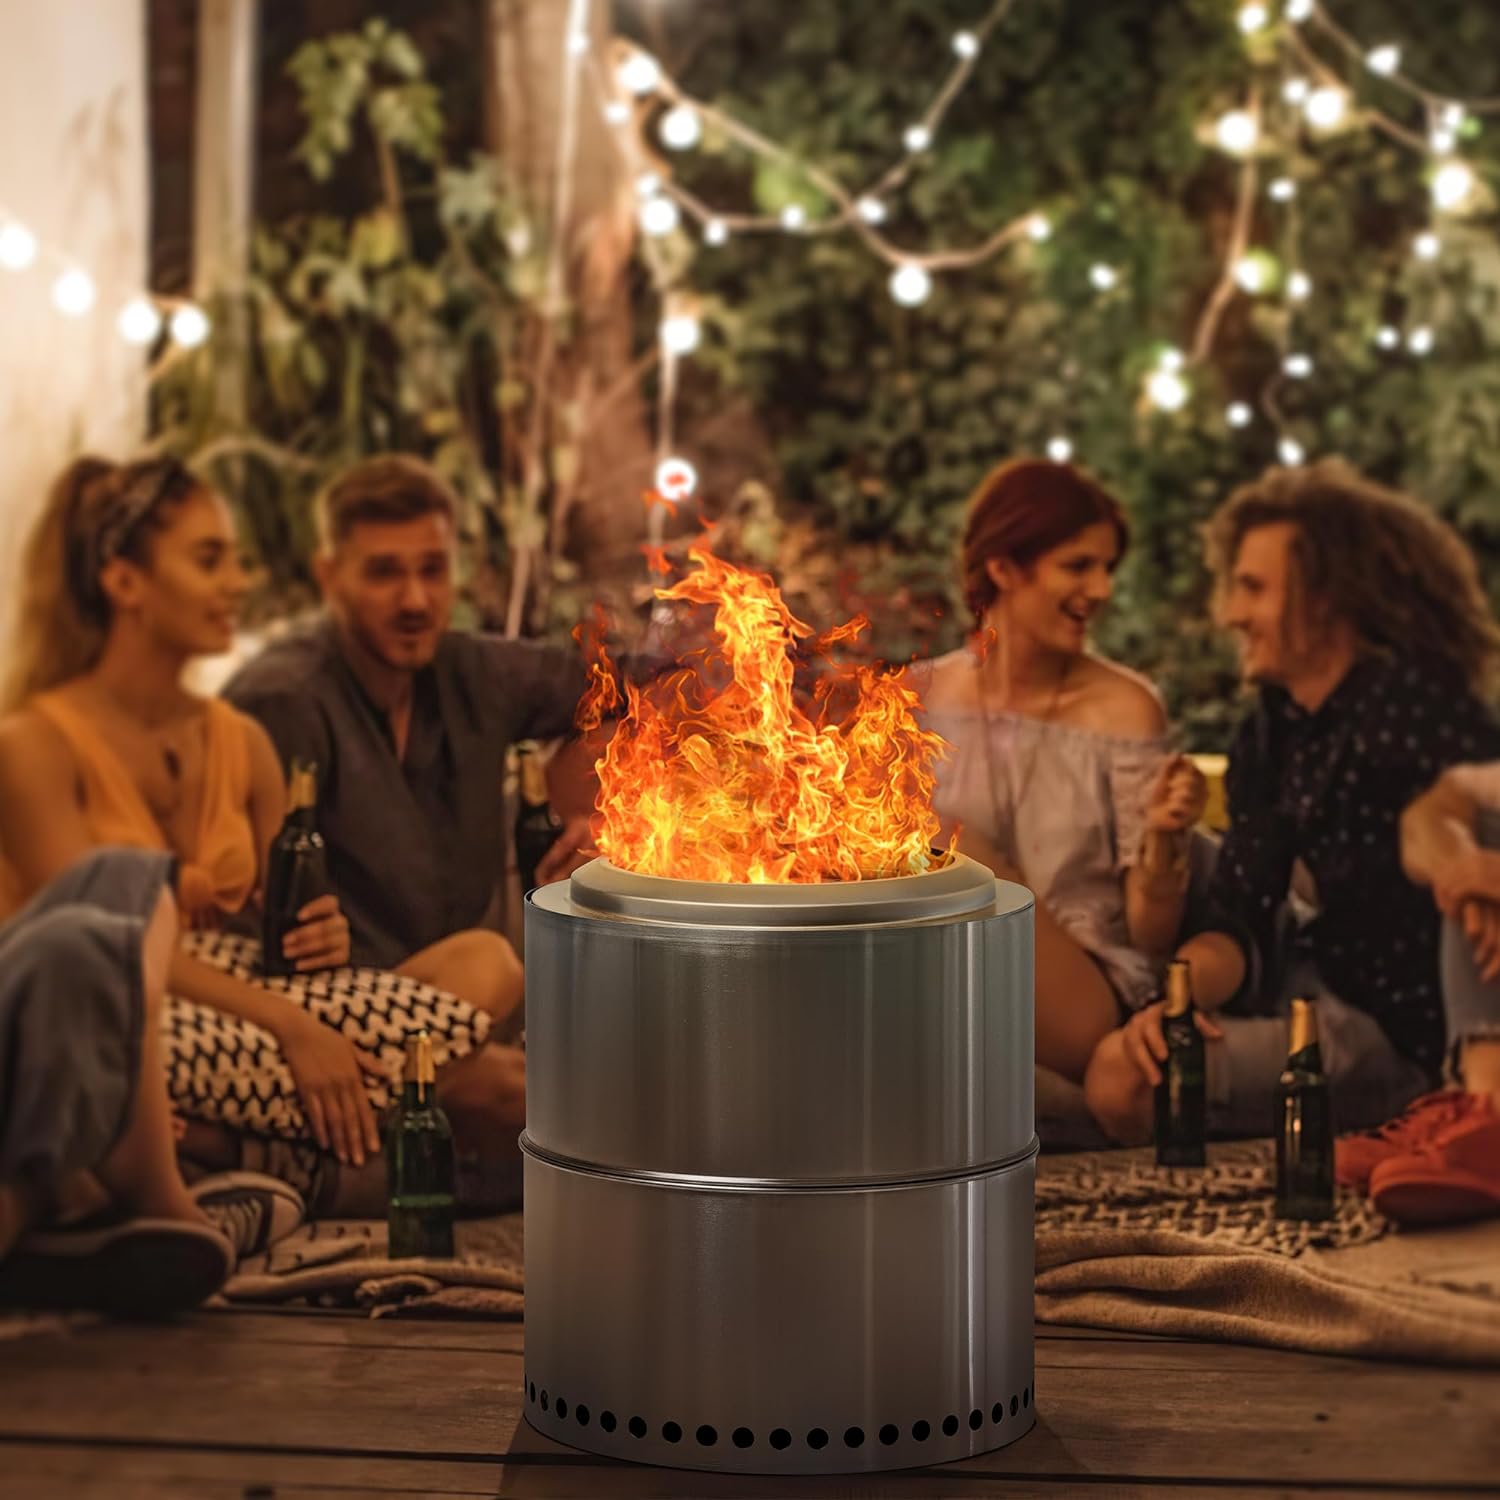 Flamaker Fire Pit Review